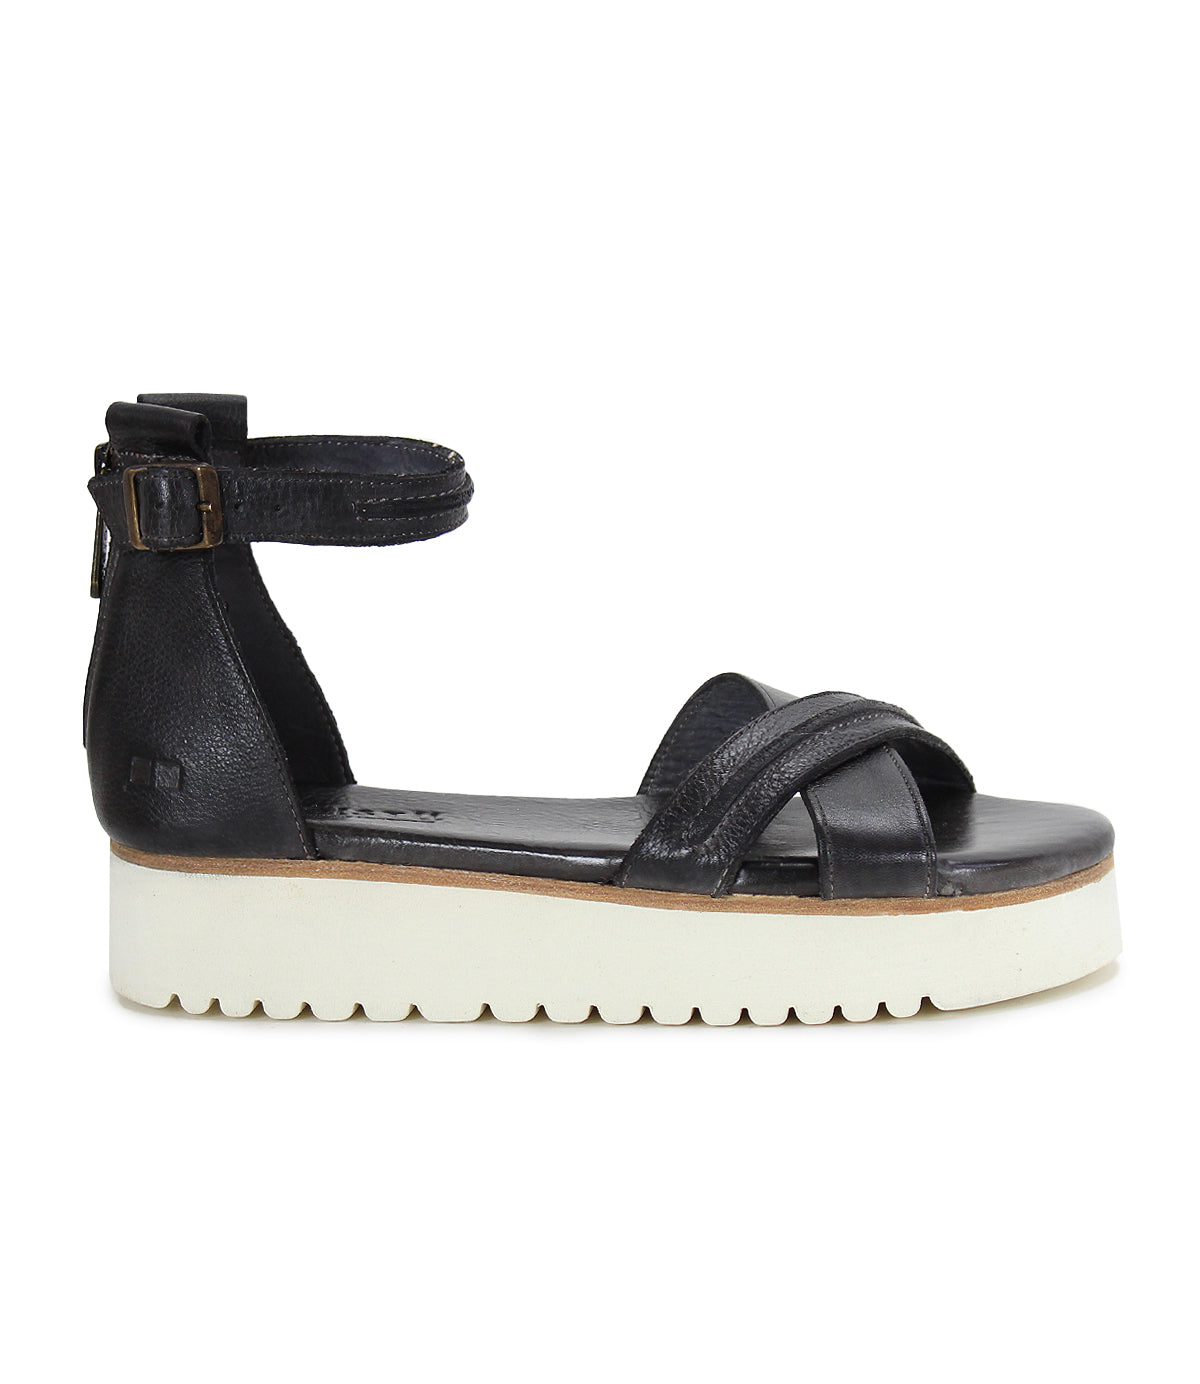 A women's black leather Carroll sandal with a white sole by Bed Stu.